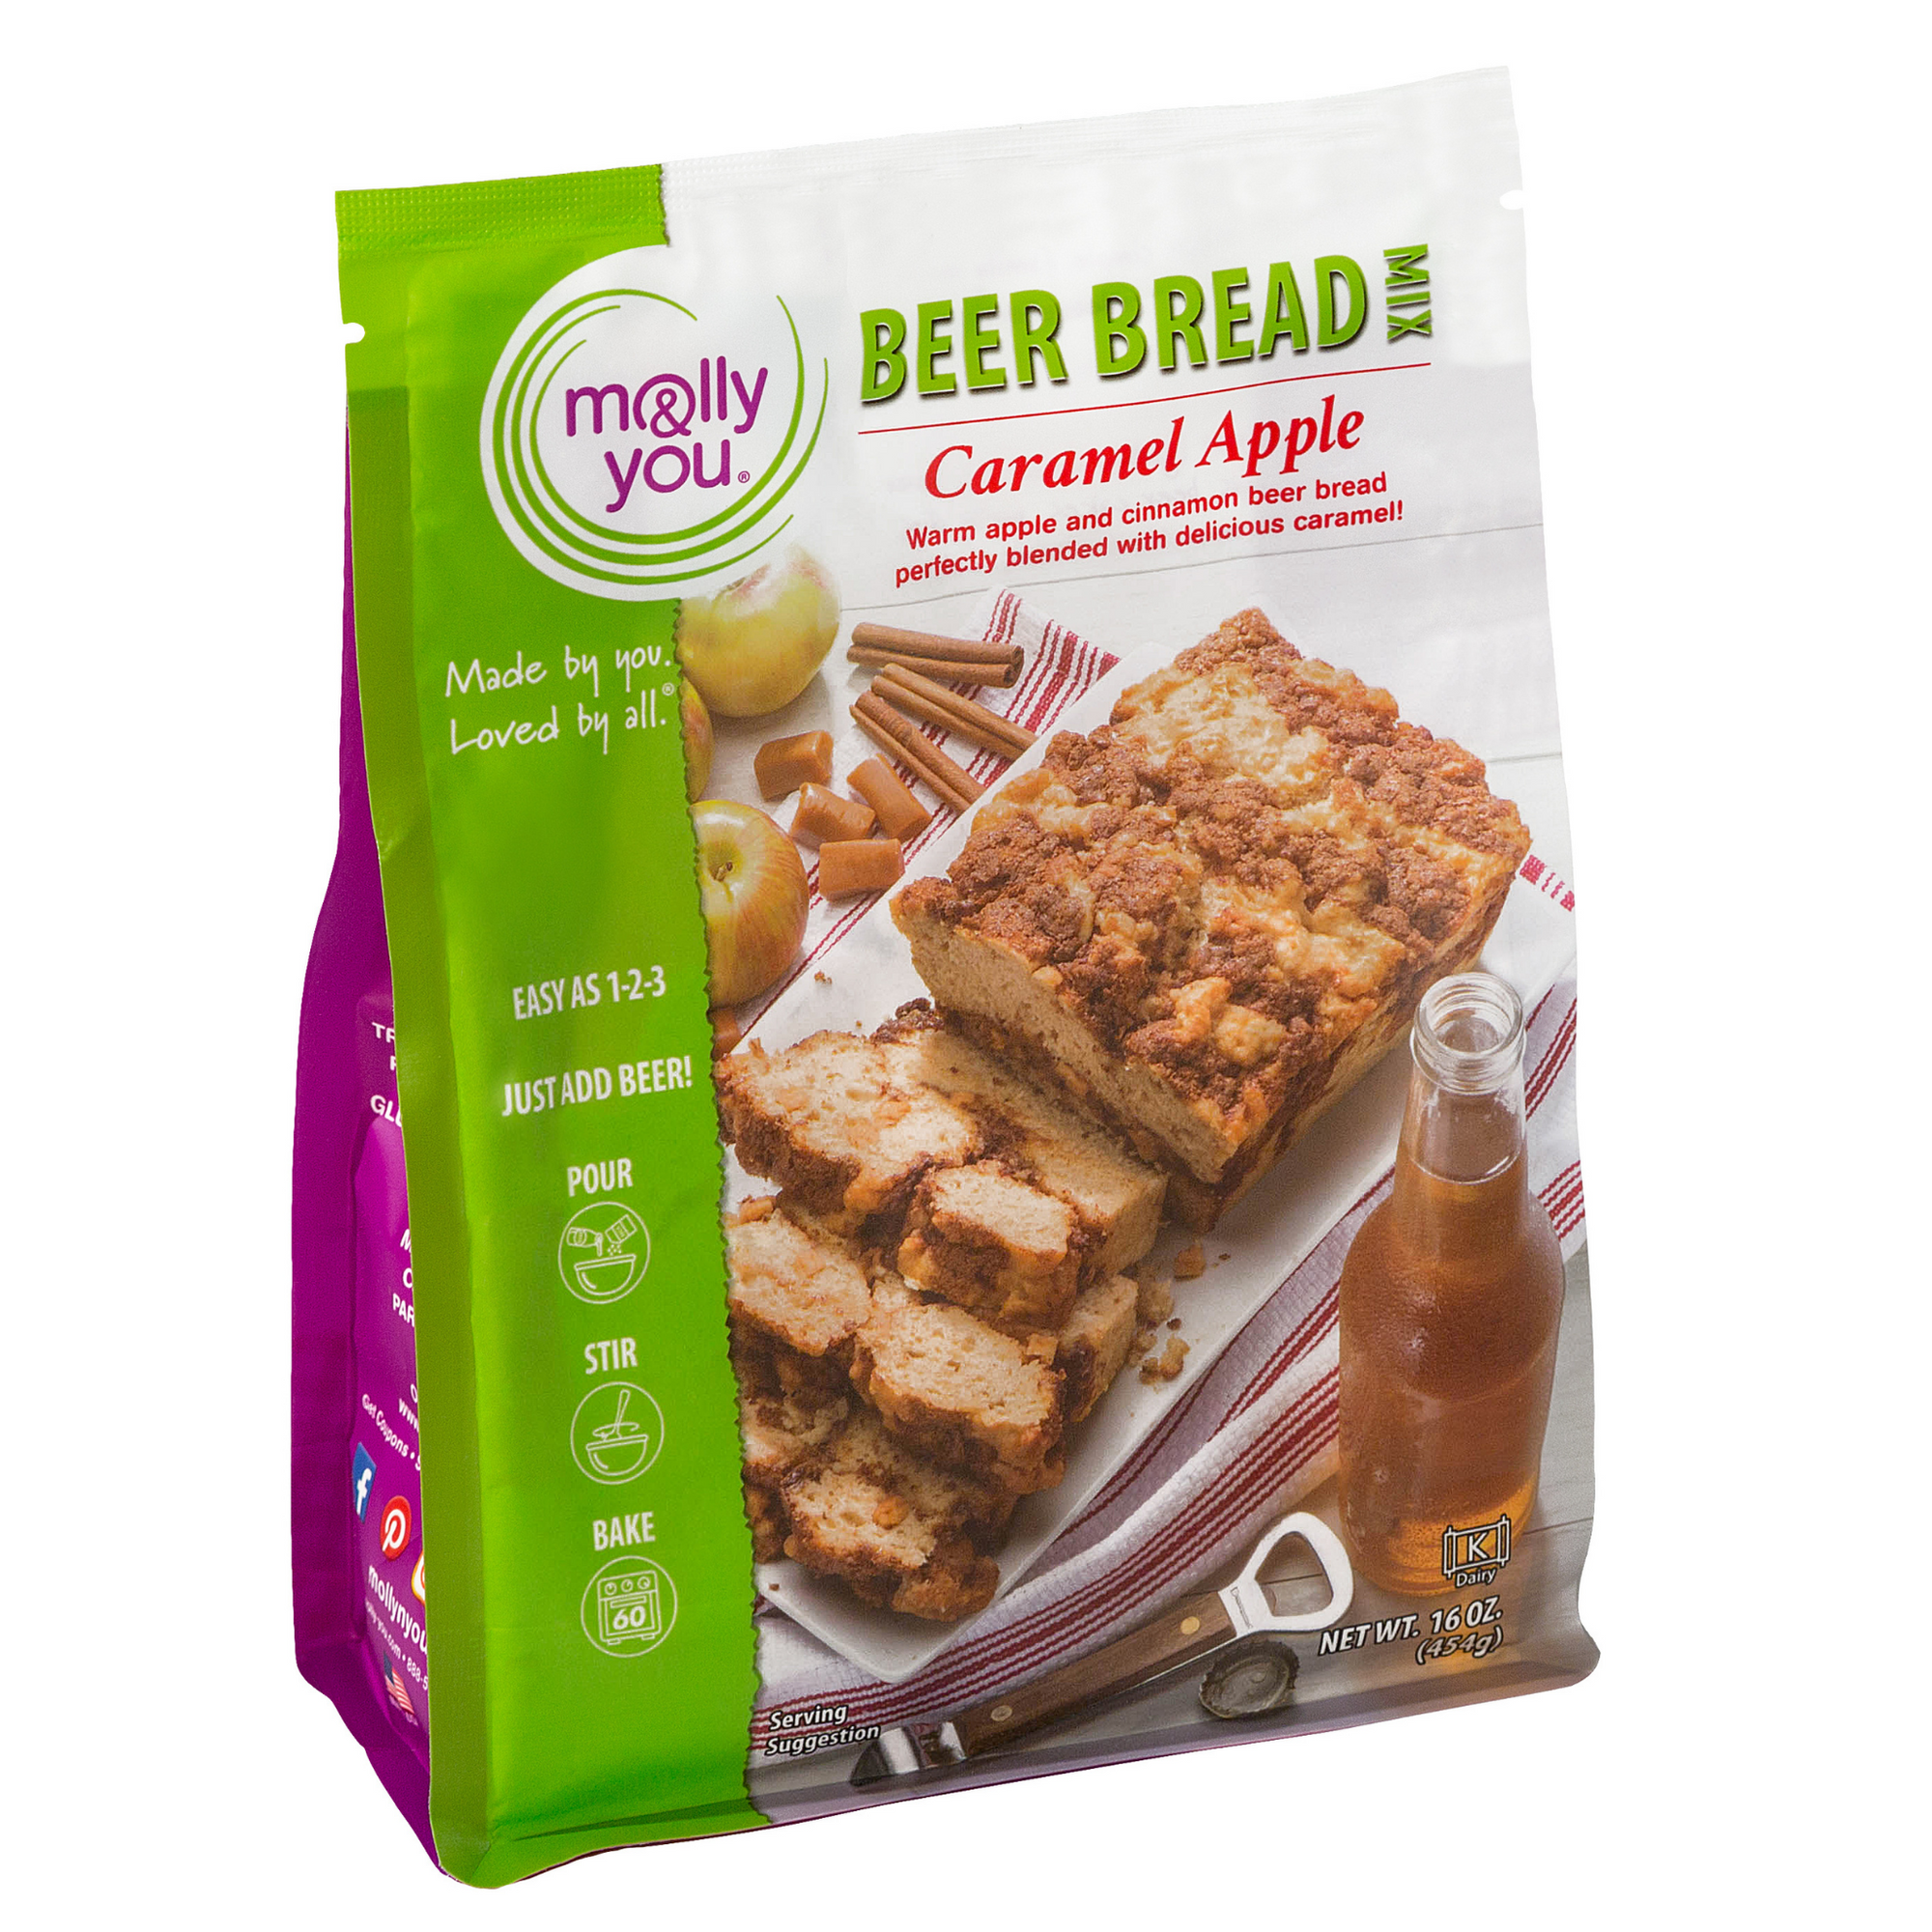 Front Package of the Caramel Apple Beer Bread Mix